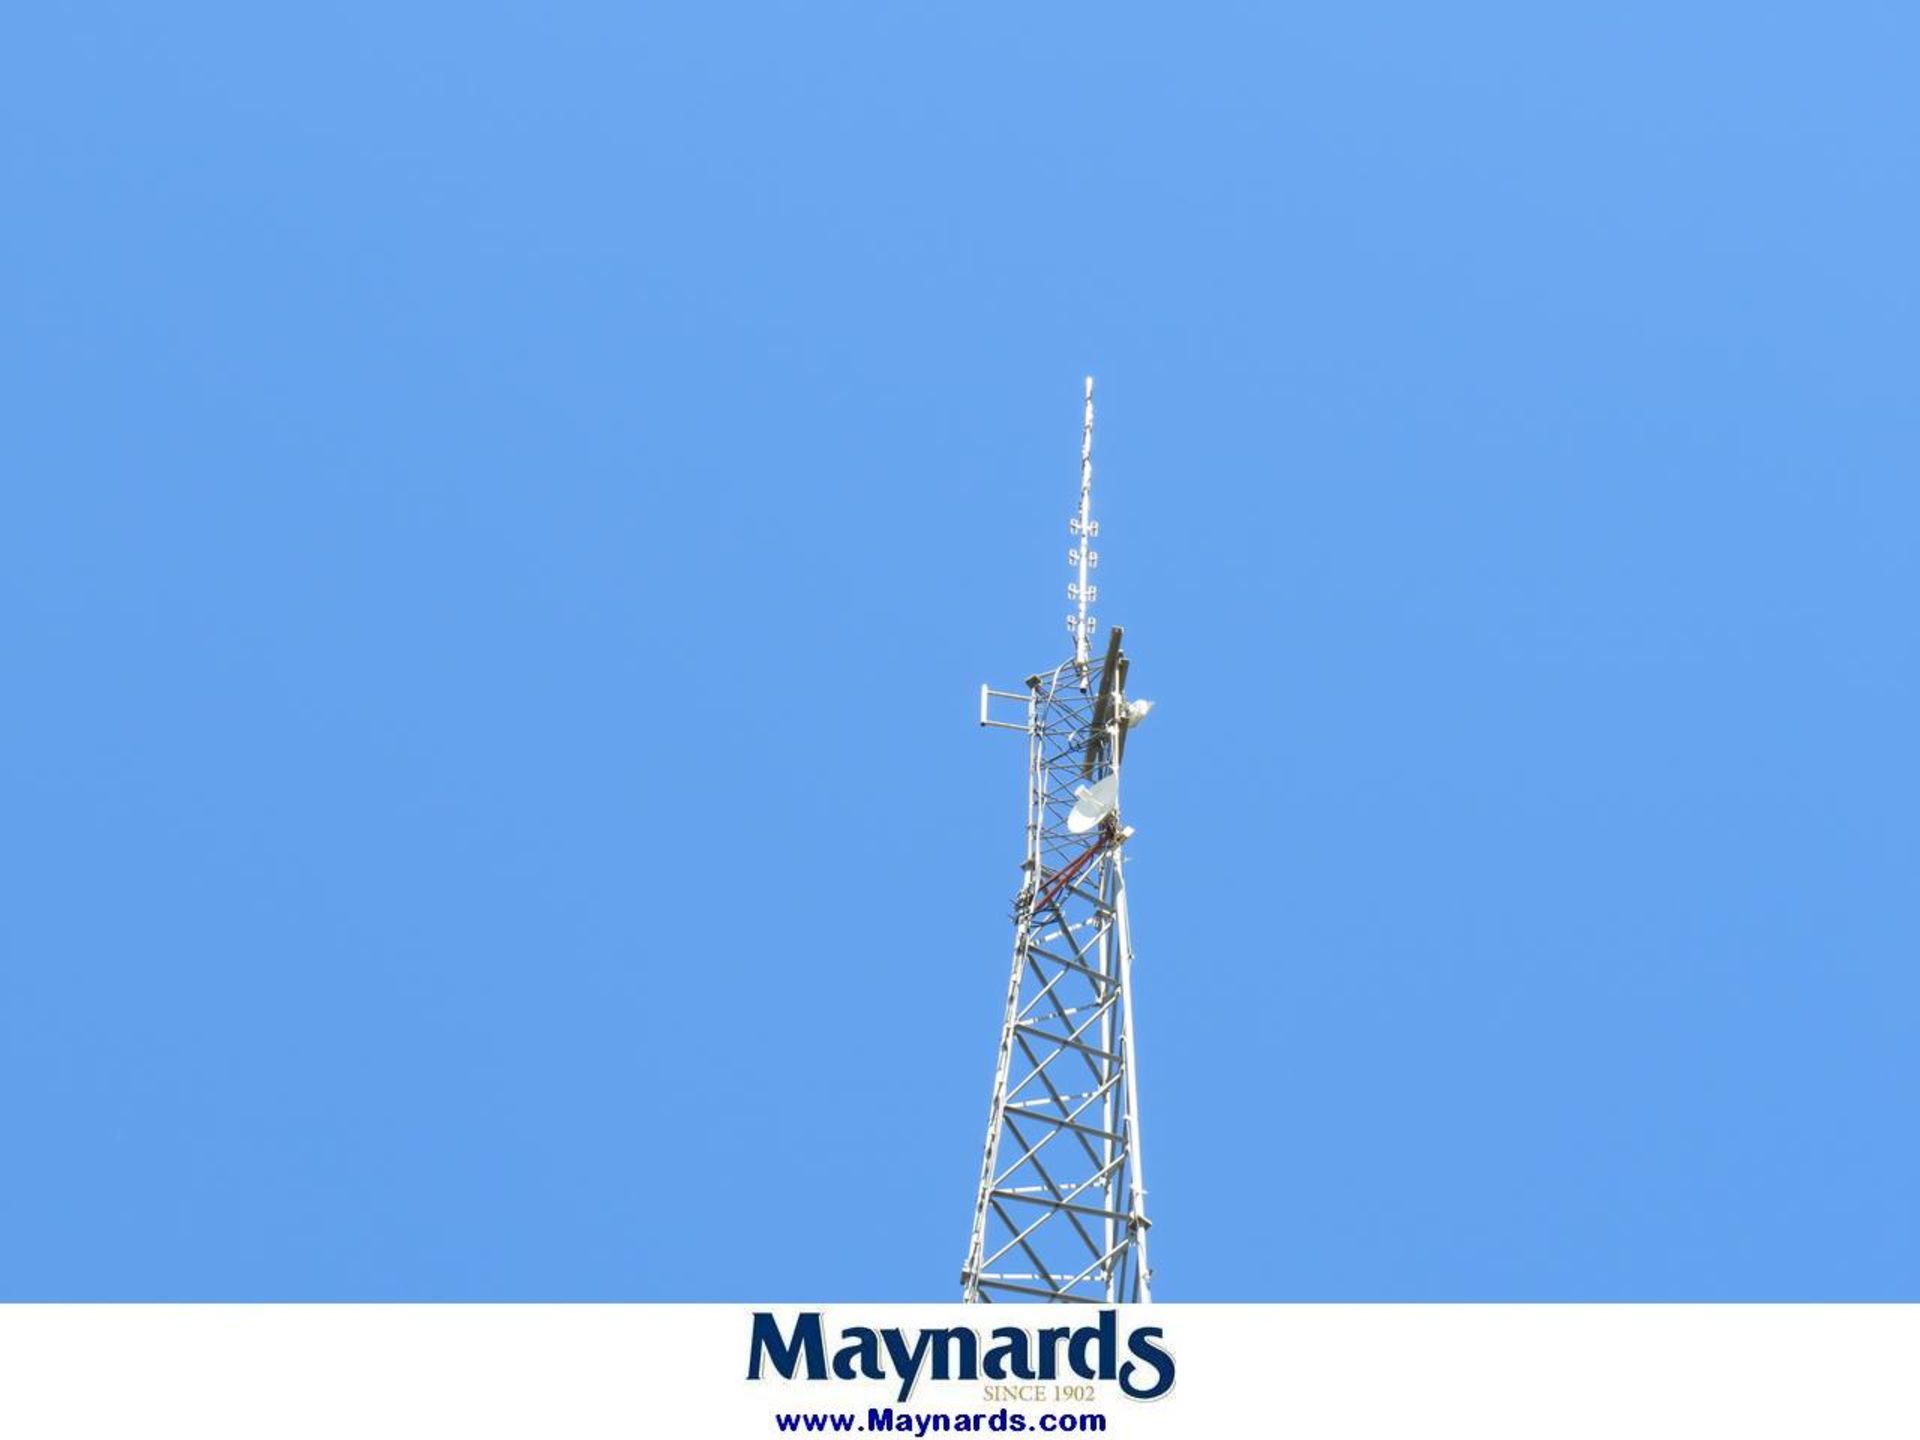 Approx. 200' High Communications Tower - Image 4 of 8